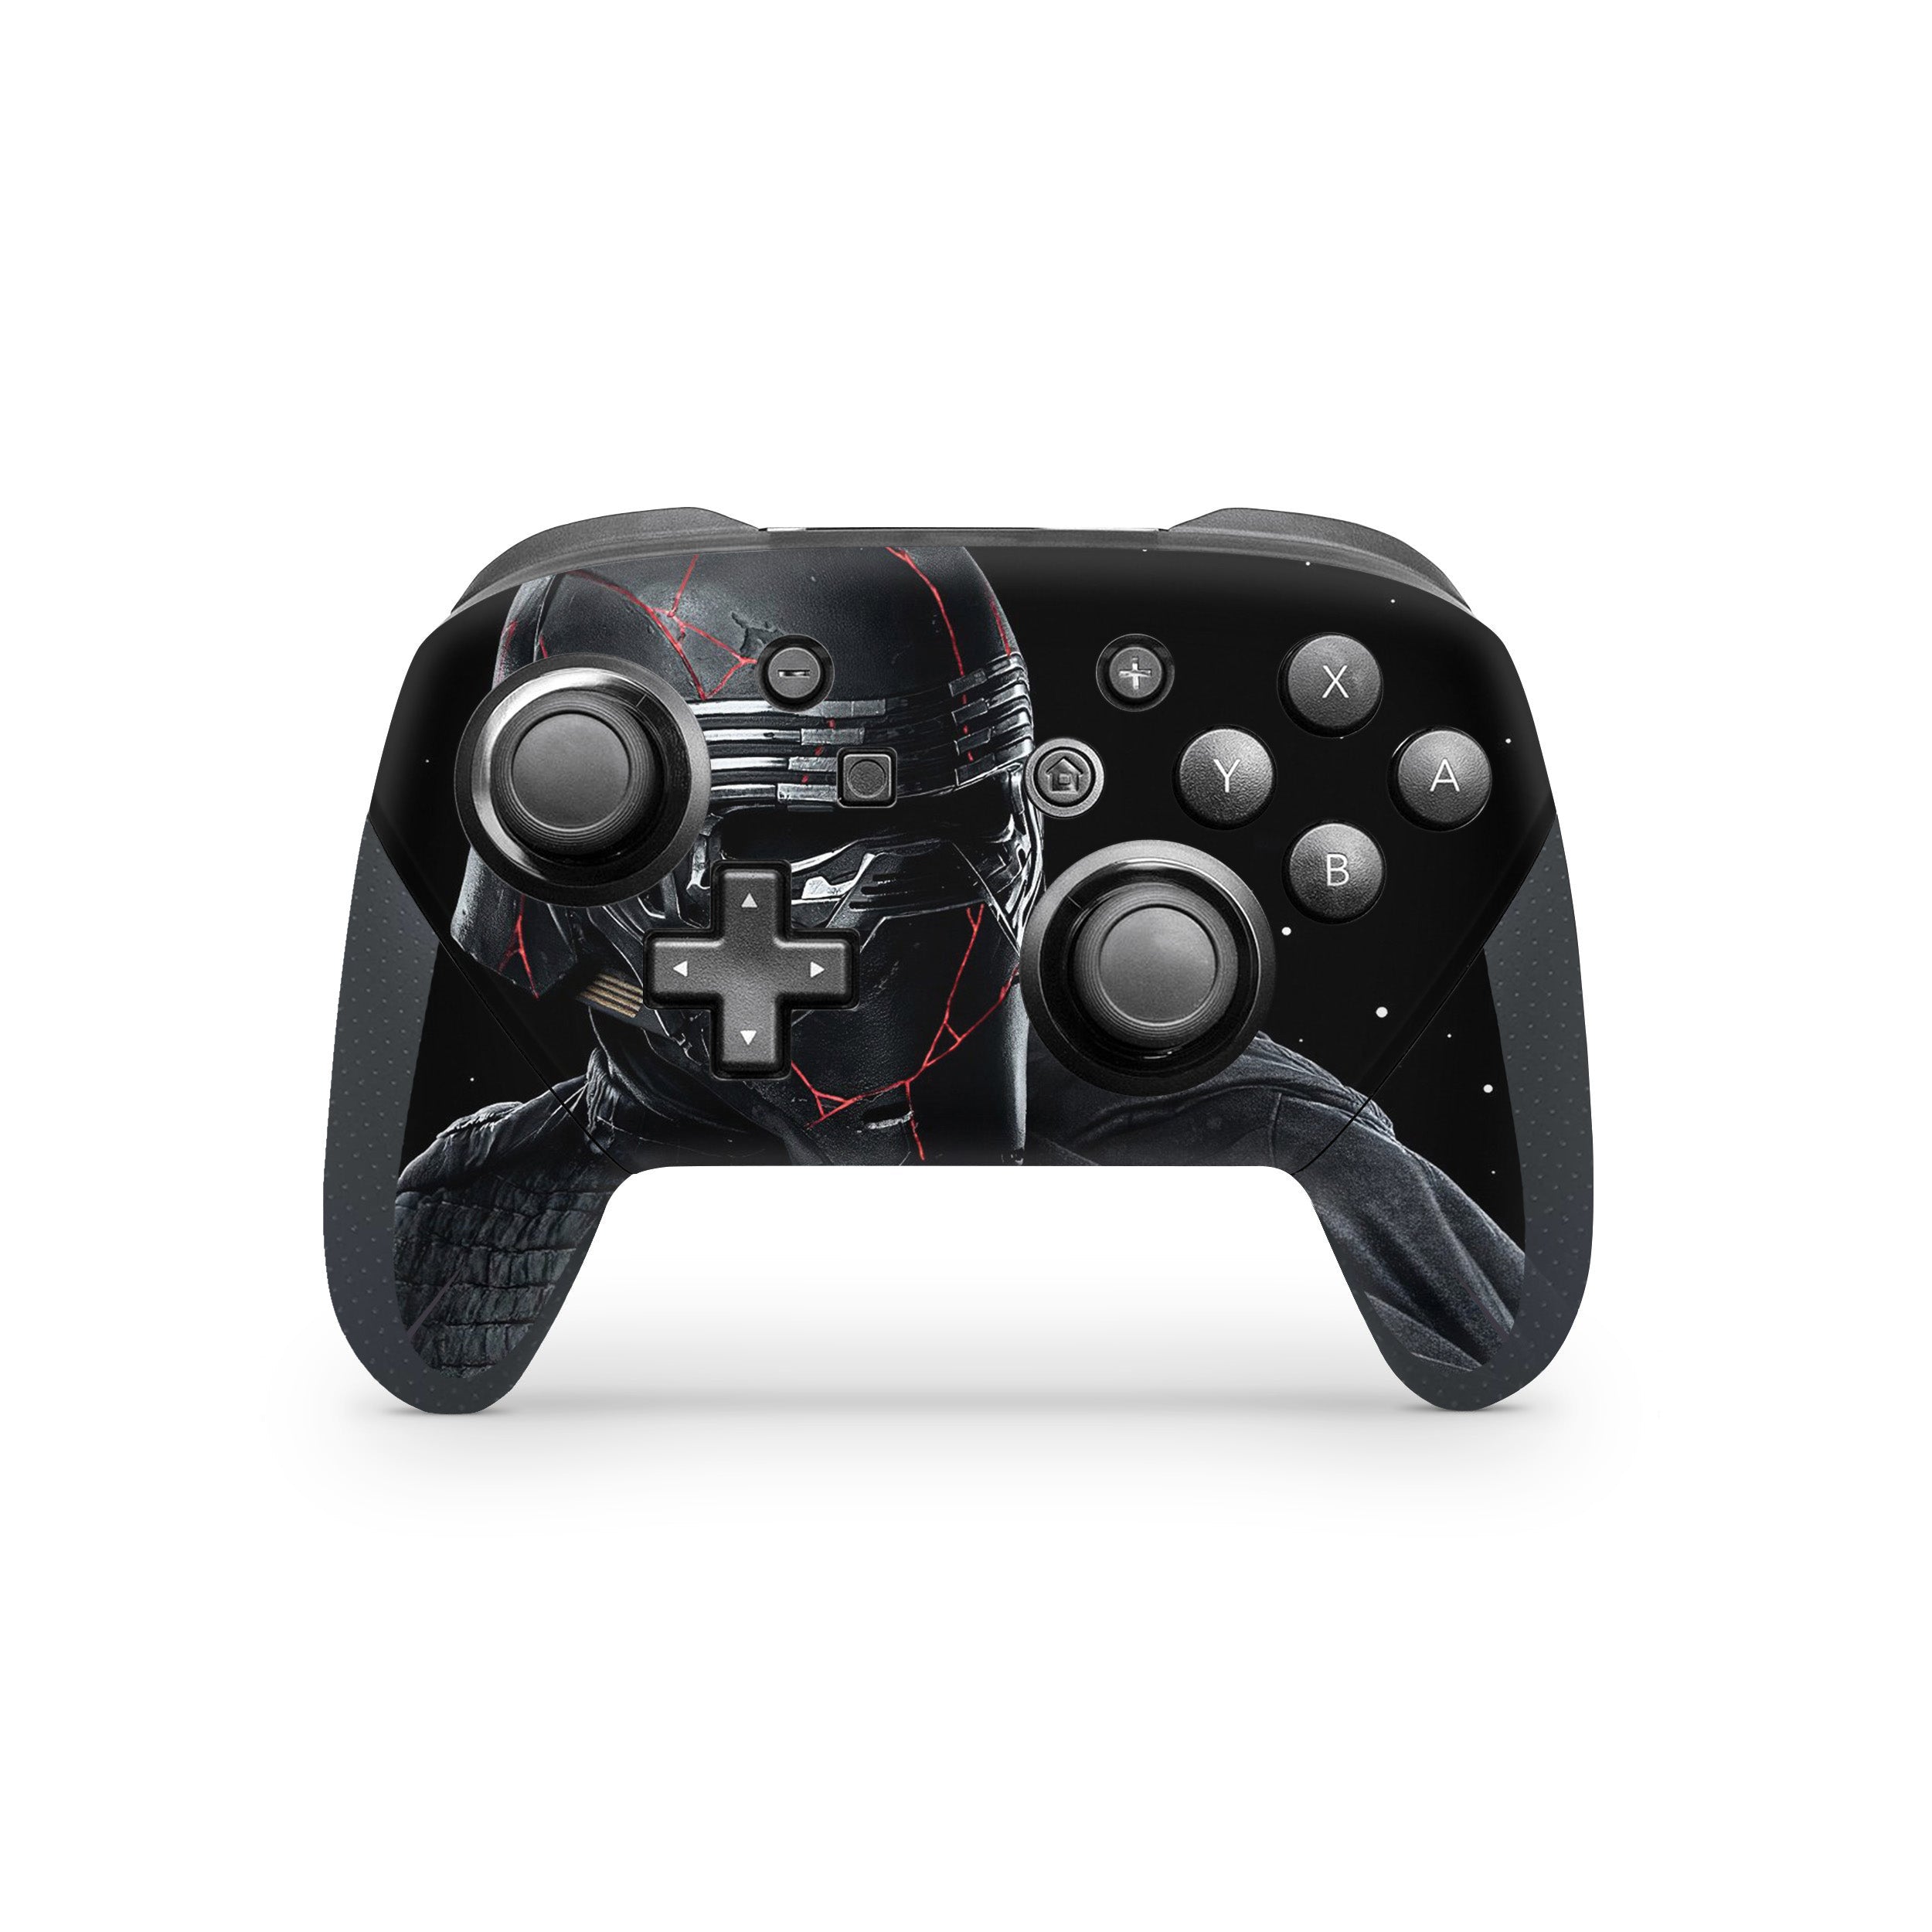 A video game skin featuring a Star Wars design for the Switch Pro Controller.